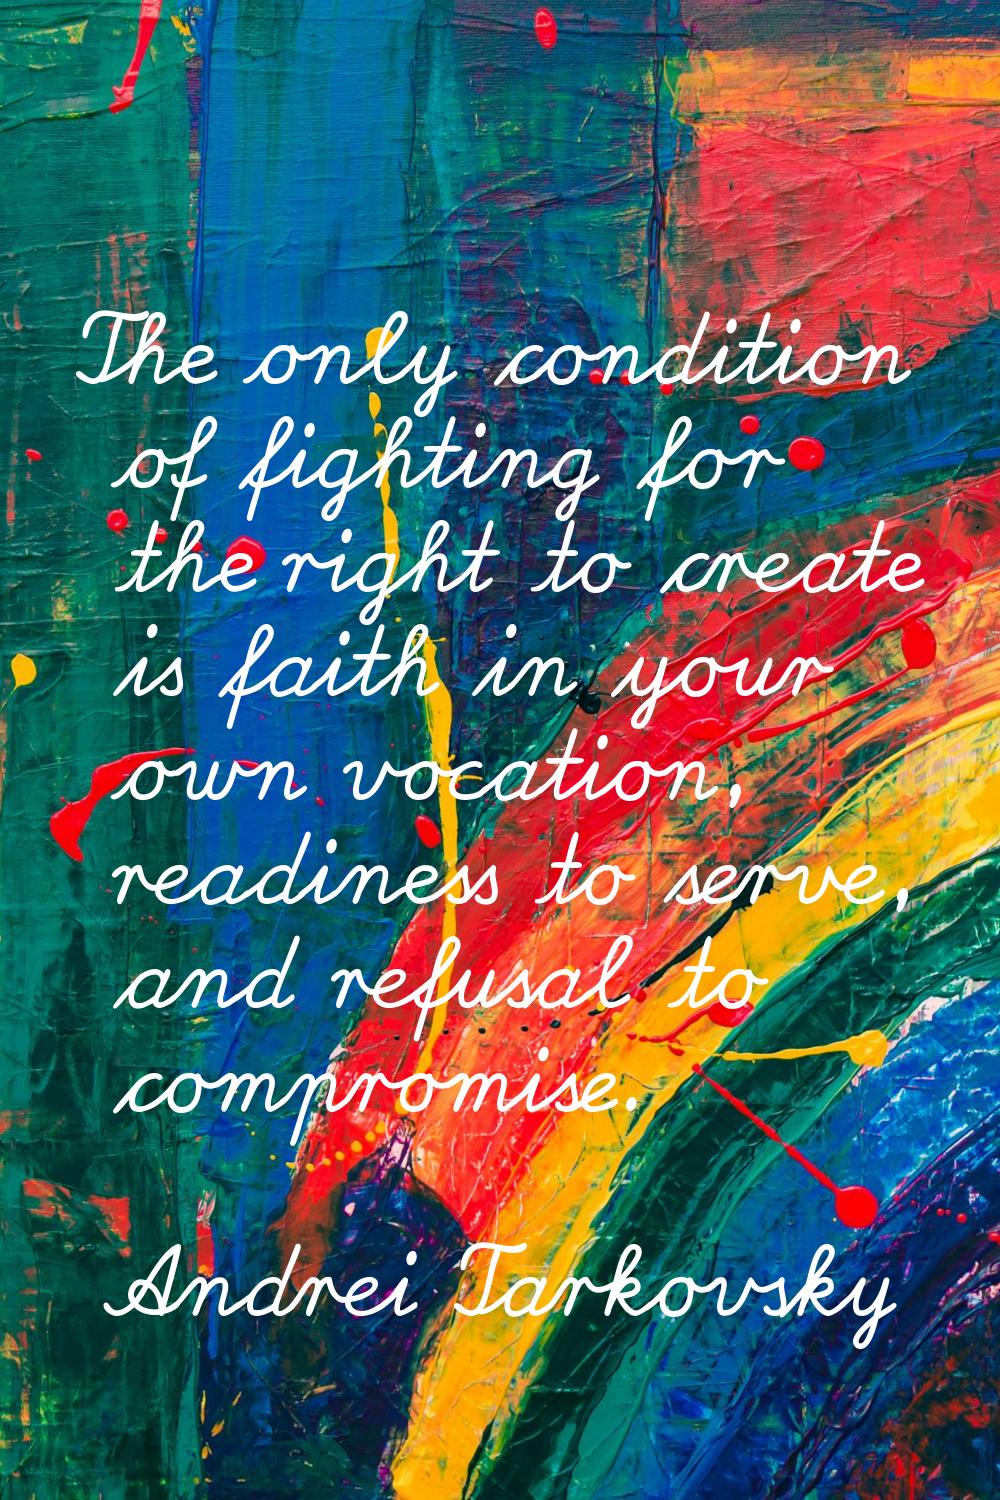 The only condition of fighting for the right to create is faith in your own vocation, readiness to 